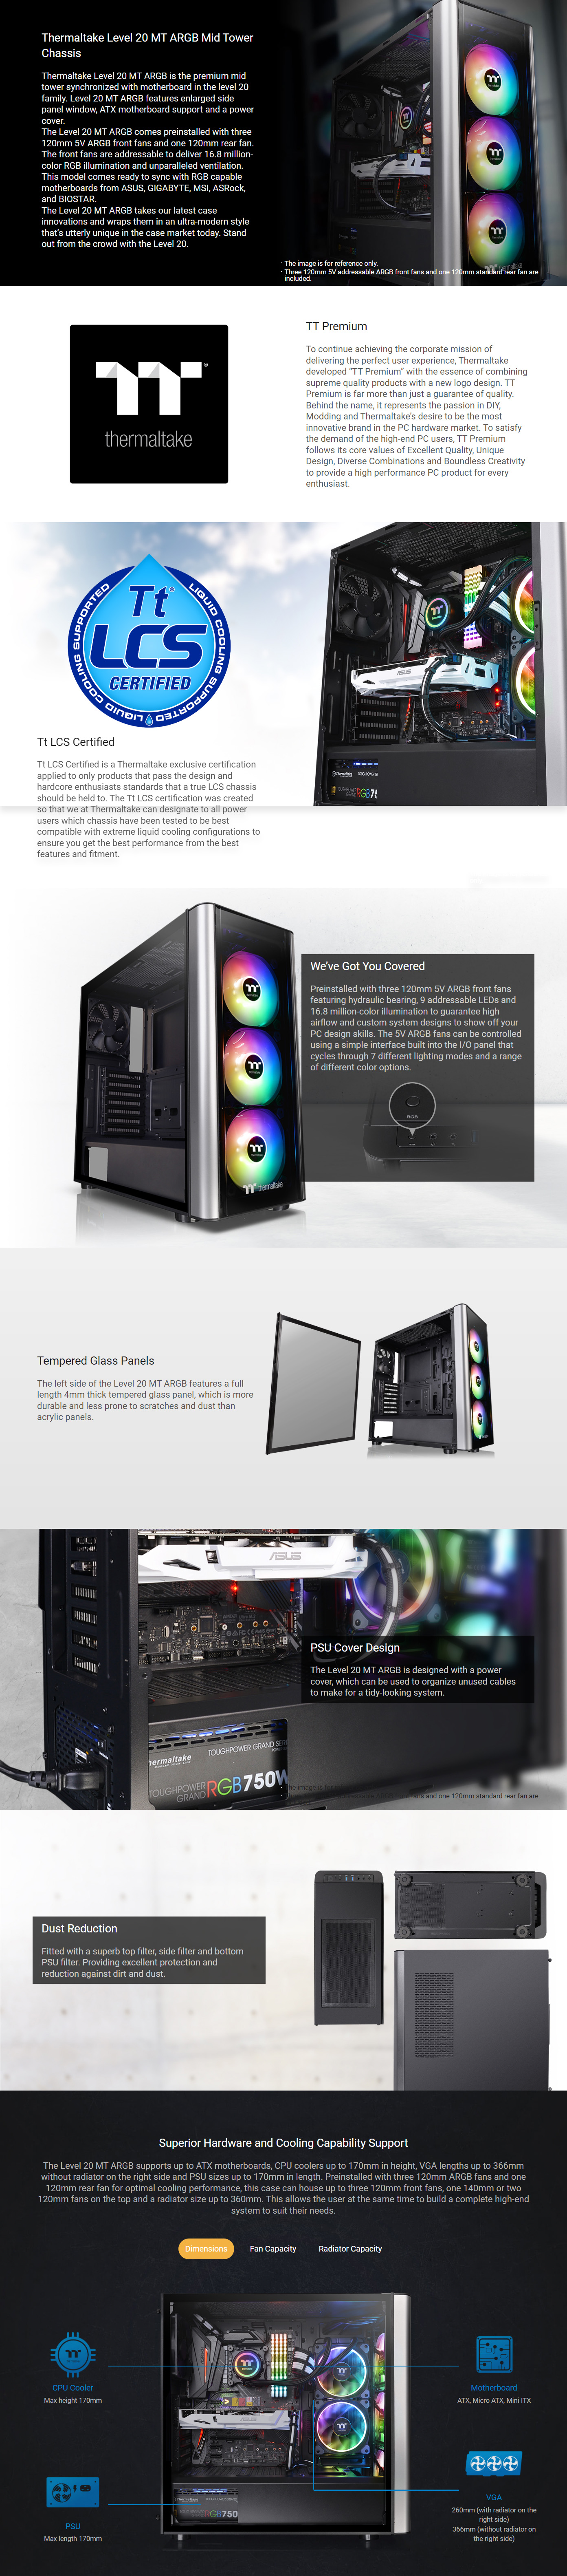 Thermaltake-Cases-Thermaltake-Level-20-MT-Tempered-Glass-ARGB-Case-with-3-RGB-Fans-1